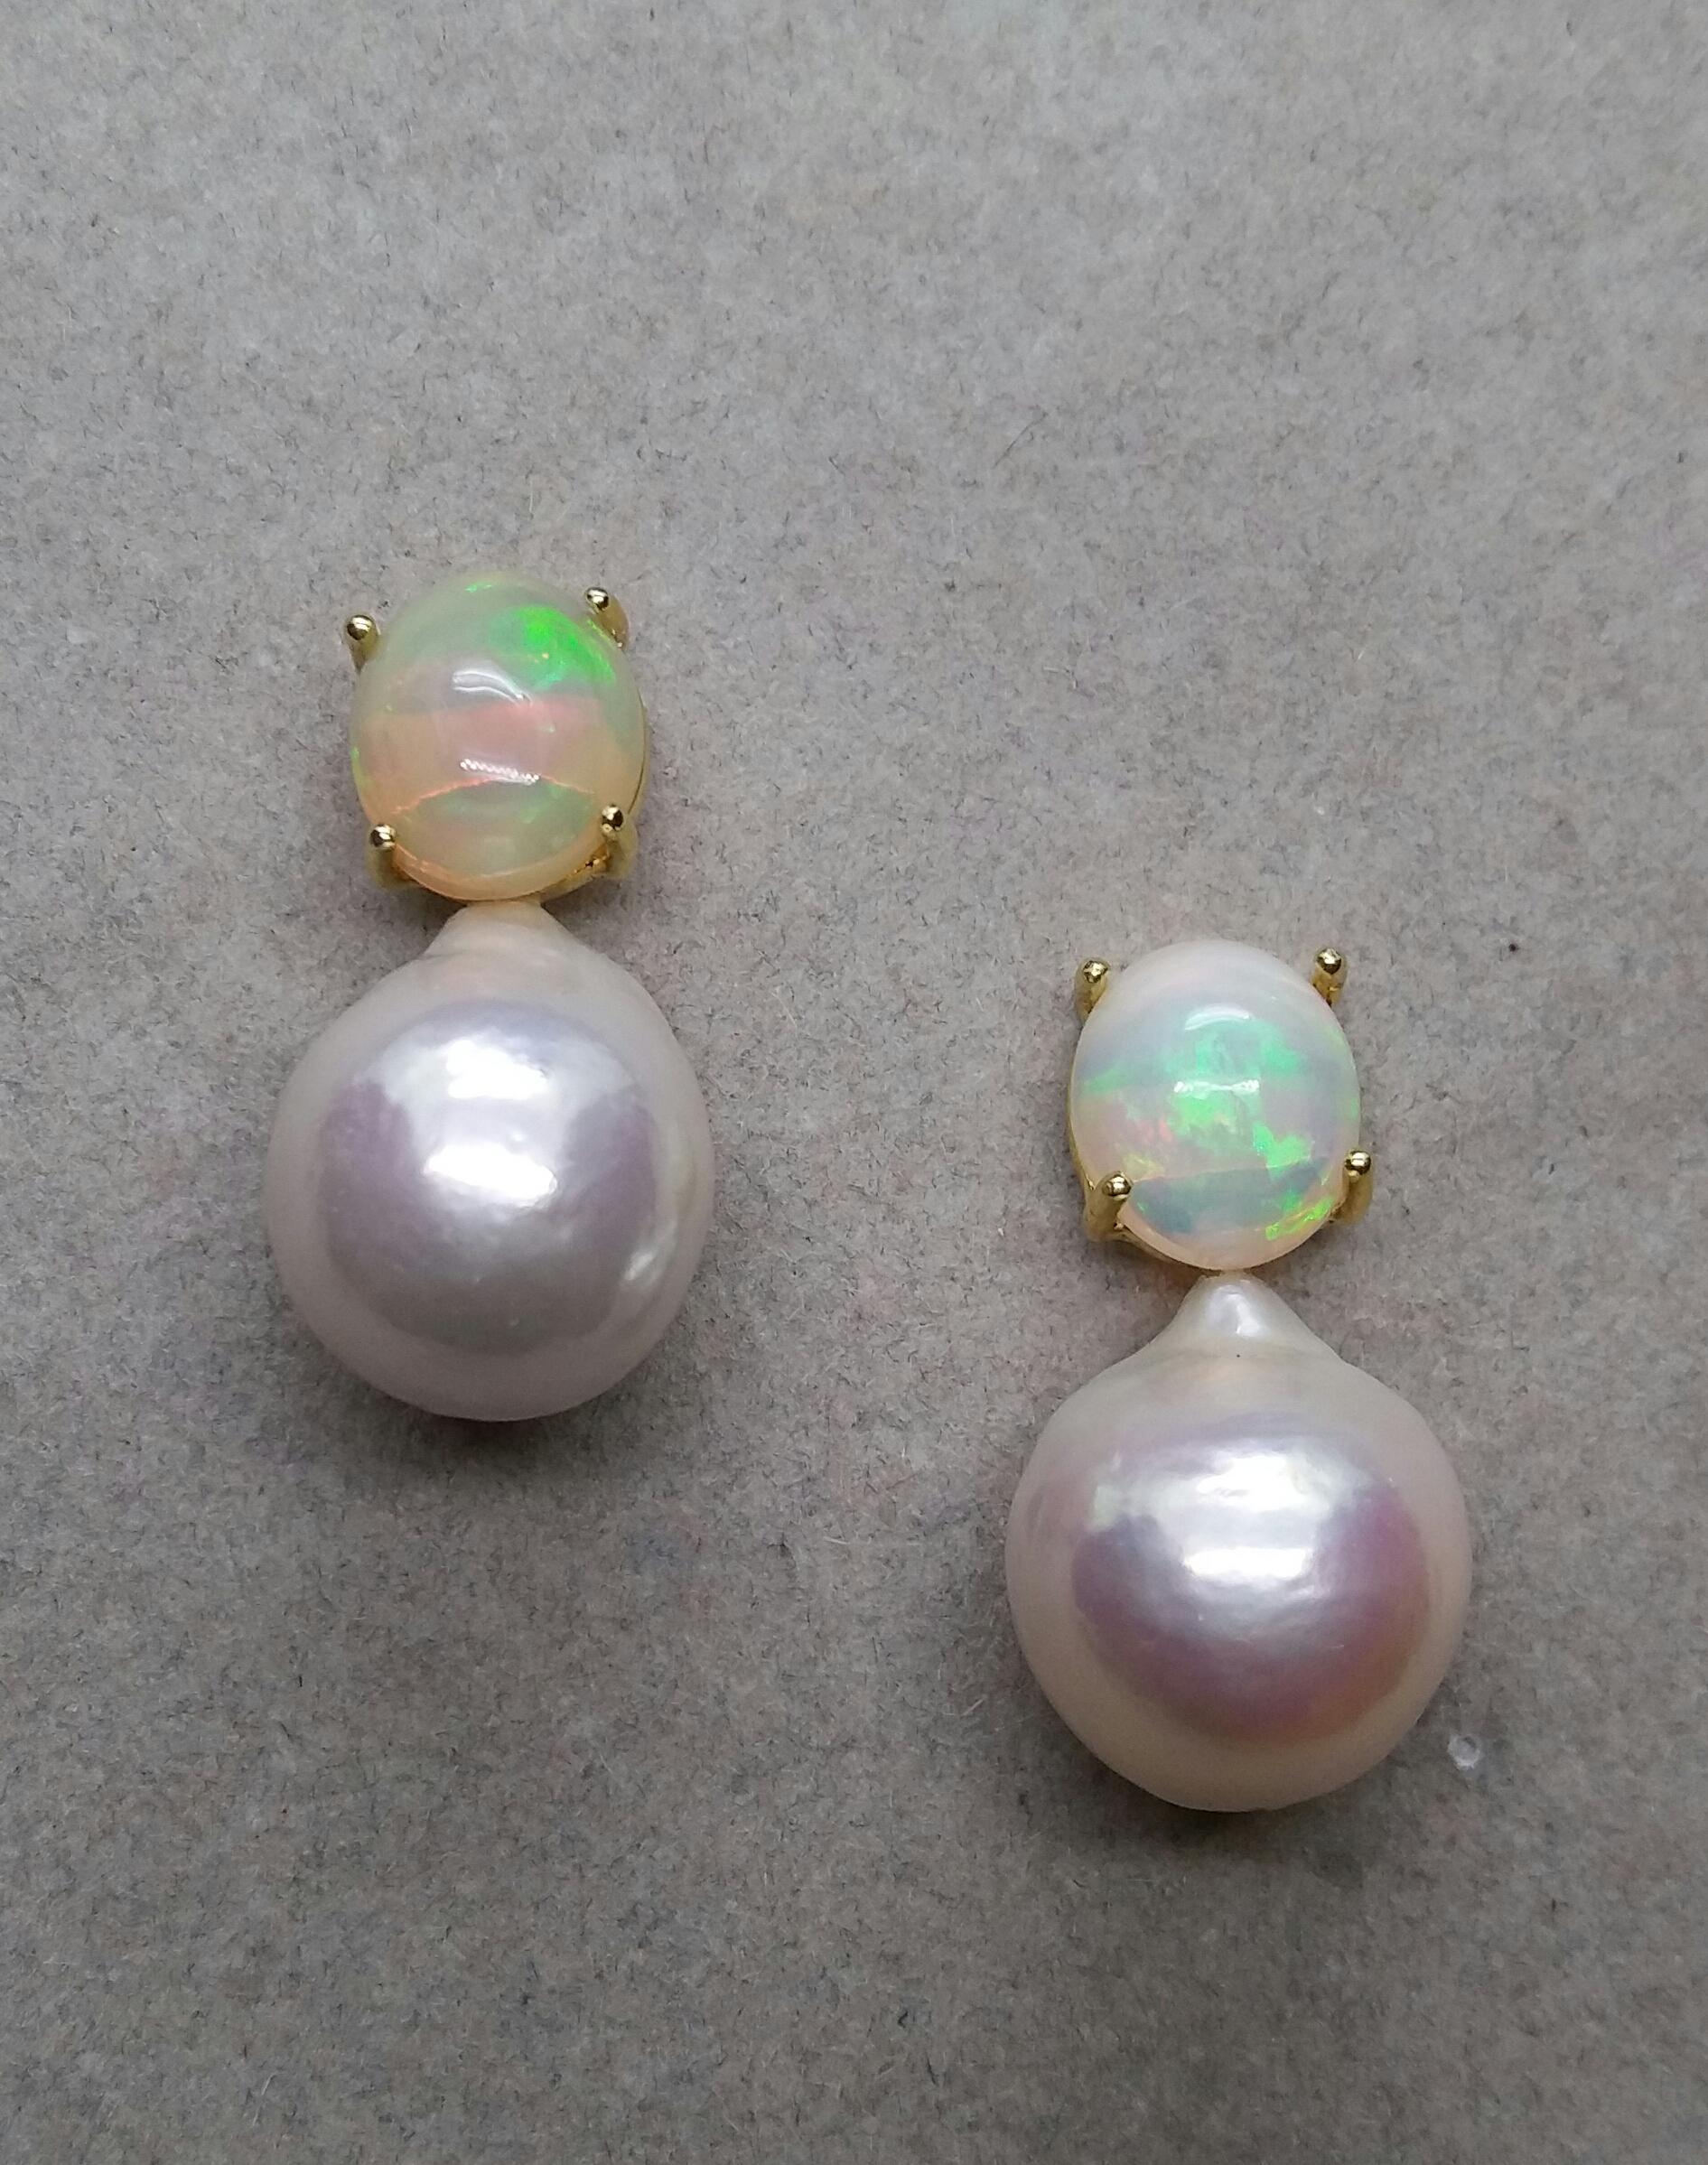 Simple chic stud earrings with a pair of Oval Solid Opal Cabs measuring 9 x 11 mm set in solid 14 Kt. yellow gold on the top and in the lower parts 2 unusual big size and excellent luster White Baroque Pearls measuring 14 x 17 mm and weighing 57